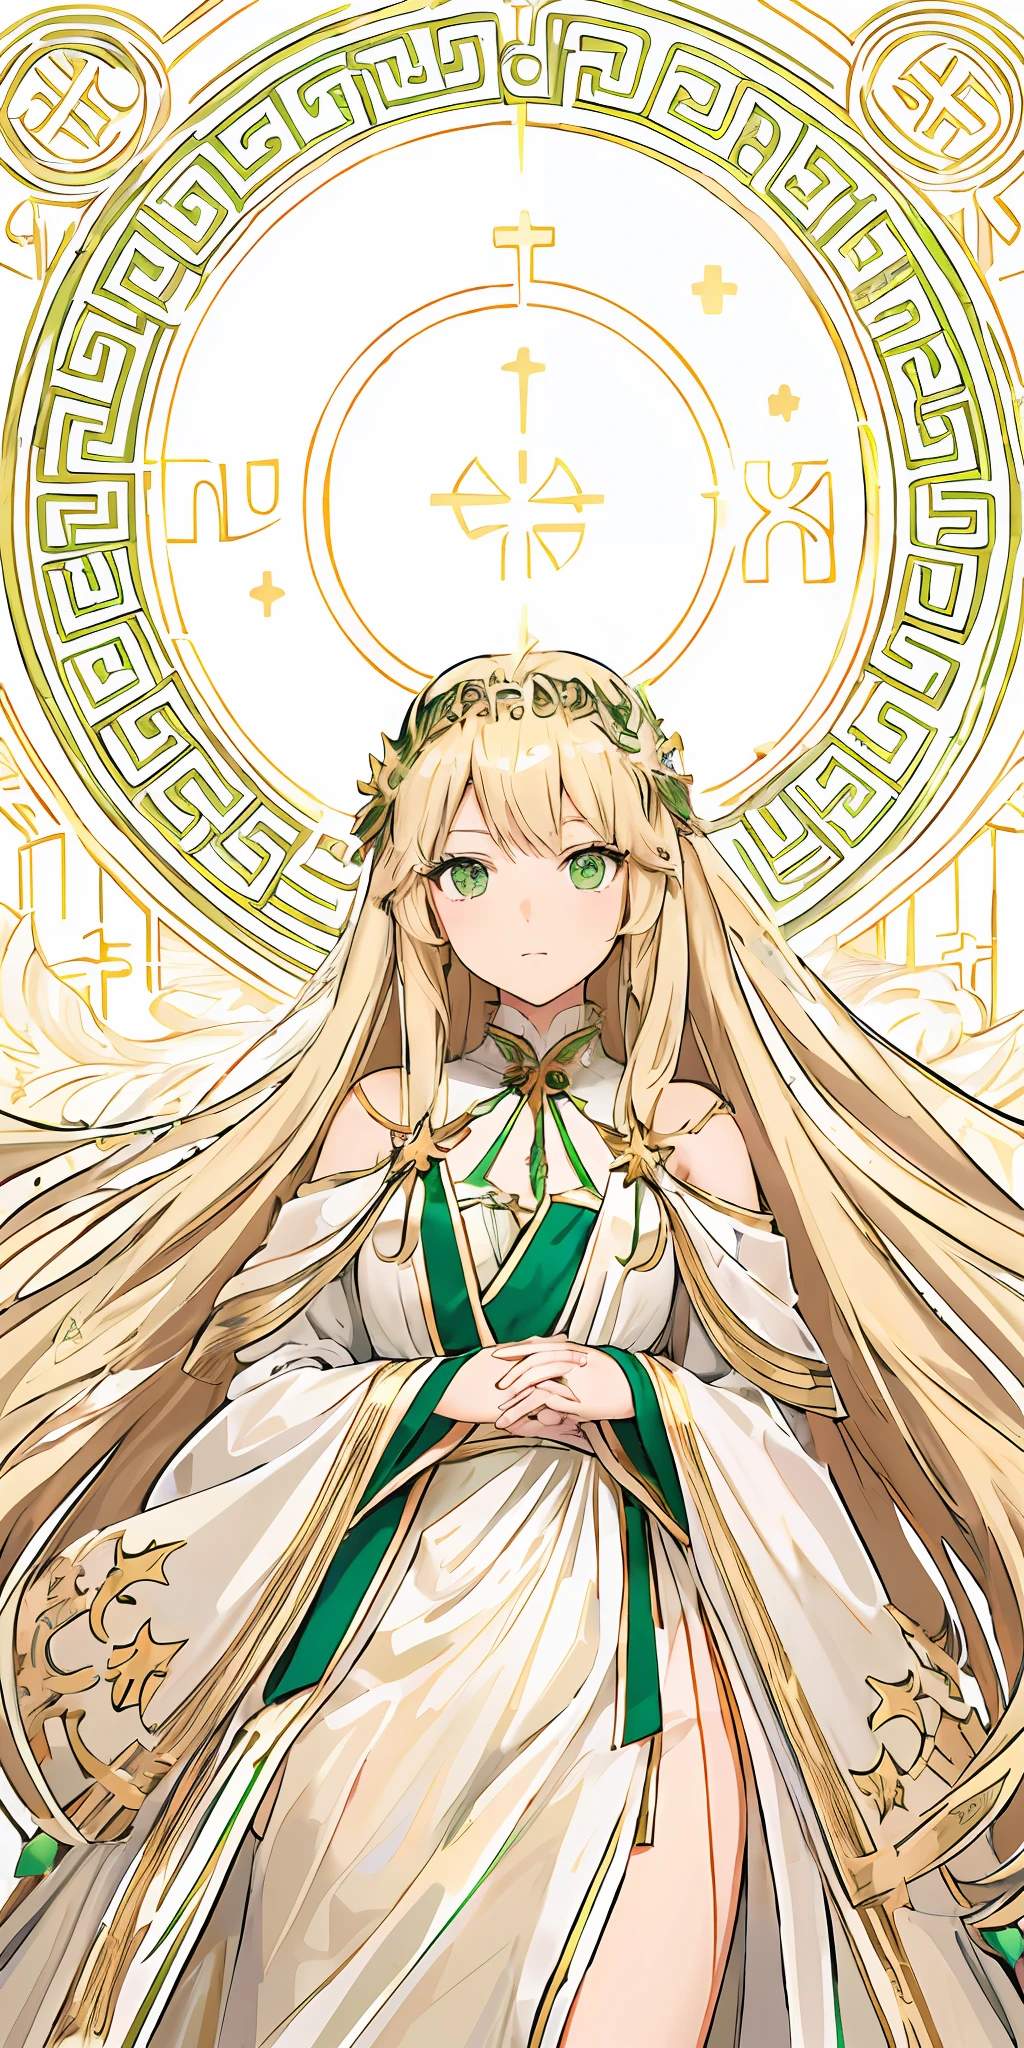 anime girl in a white dress with long blonde hair and a green and white dress, anime goddess, palutena, the goddess artemis smirking, lady palutena, portrait knights of zodiac girl, official art, ((a beautiful fantasy empress)), the godess hera looking angry, blonde anime girl with long hair, ancient goddess, anime visual of a cute girl